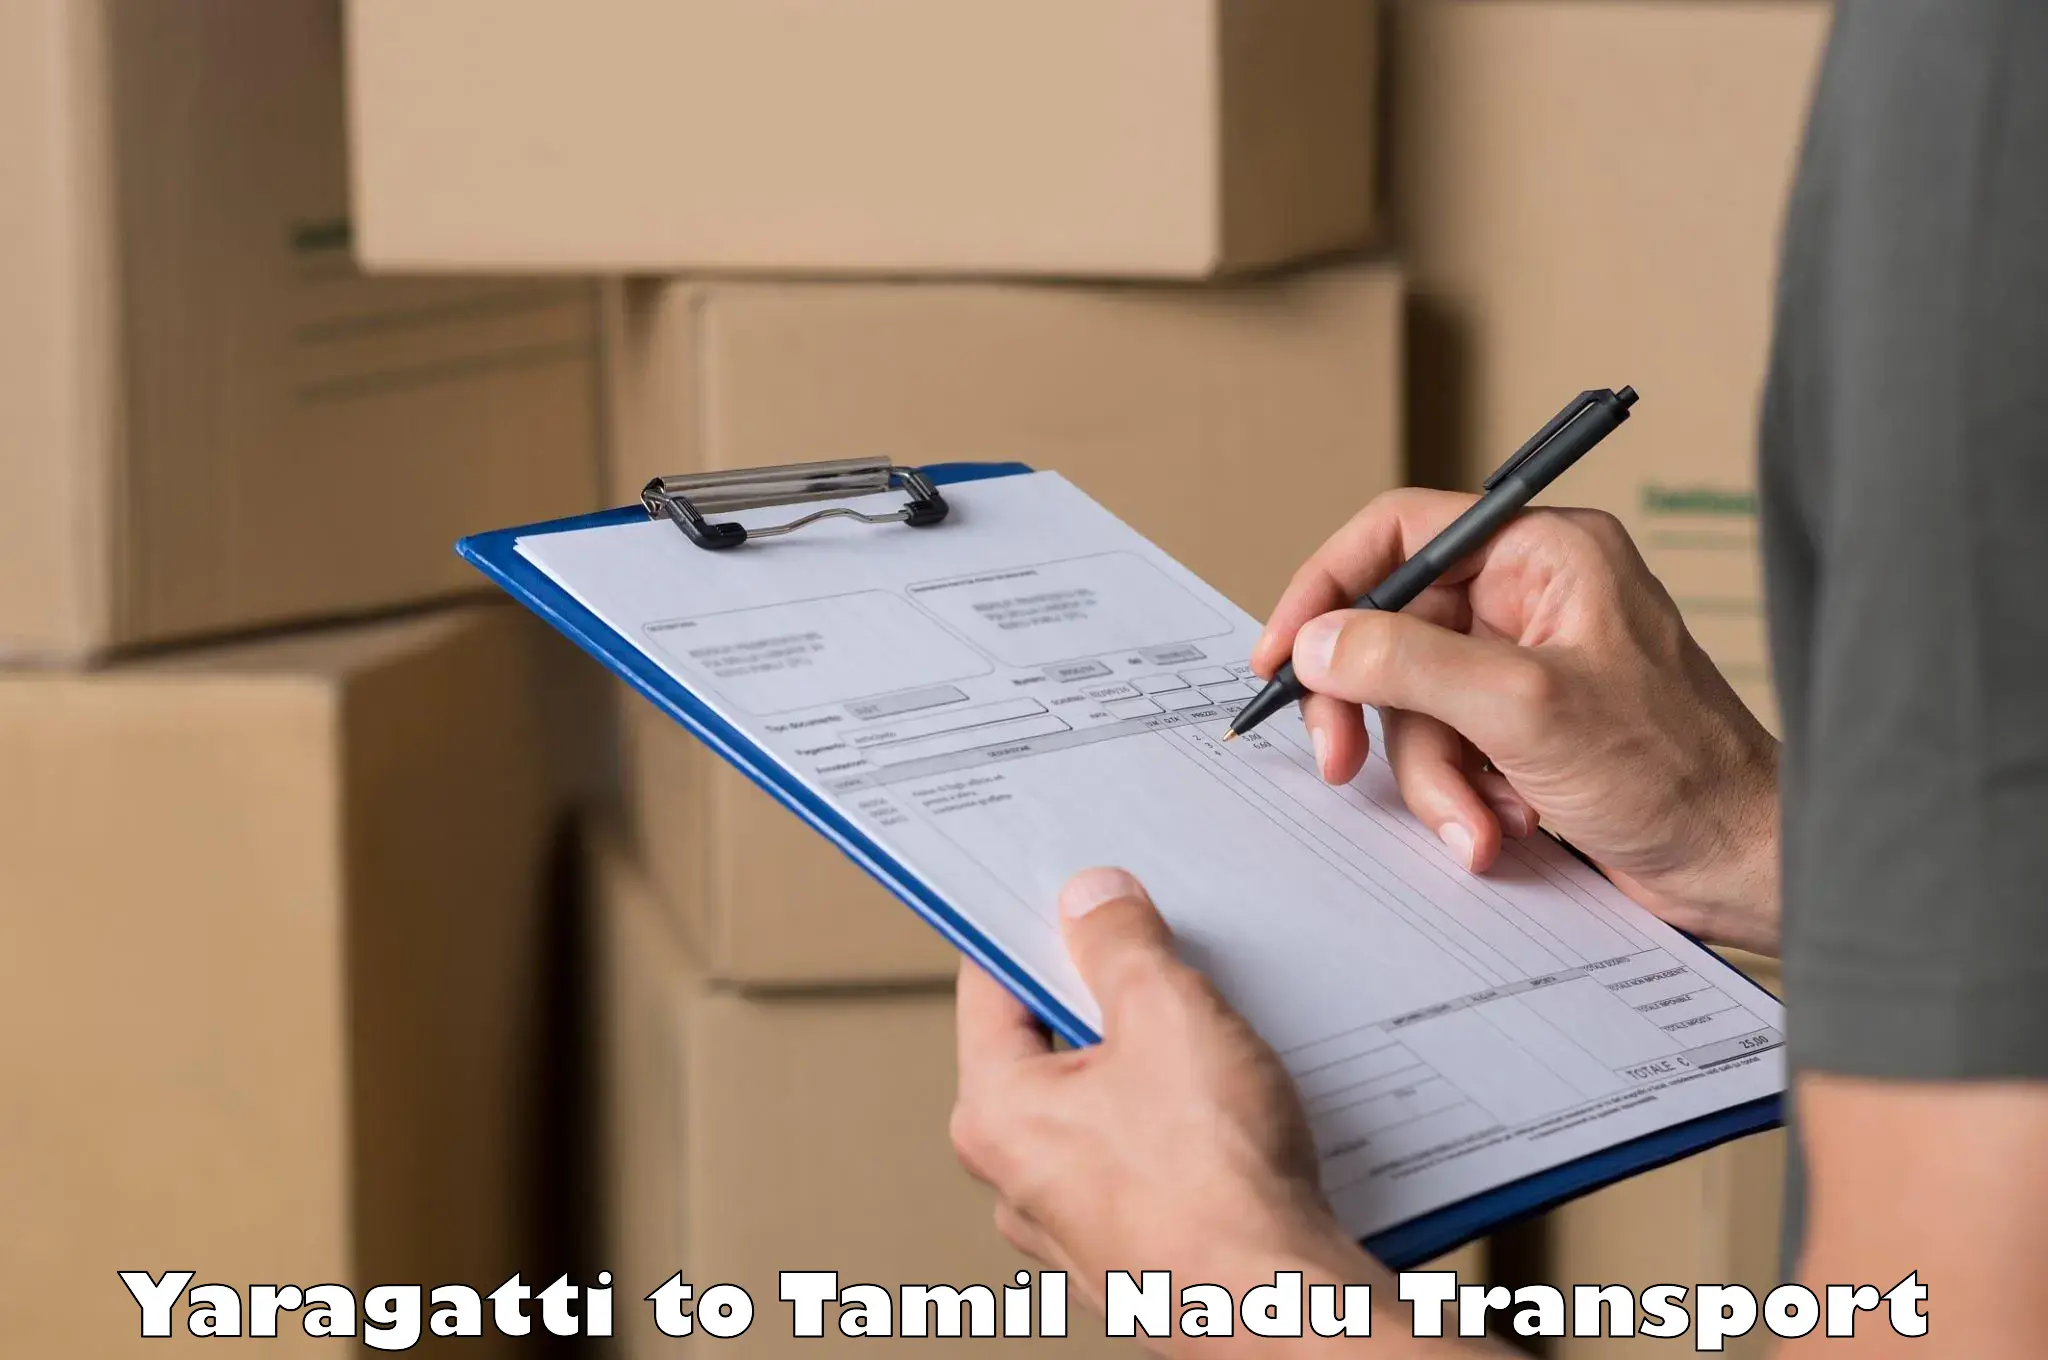 Road transport online services Yaragatti to Ooty